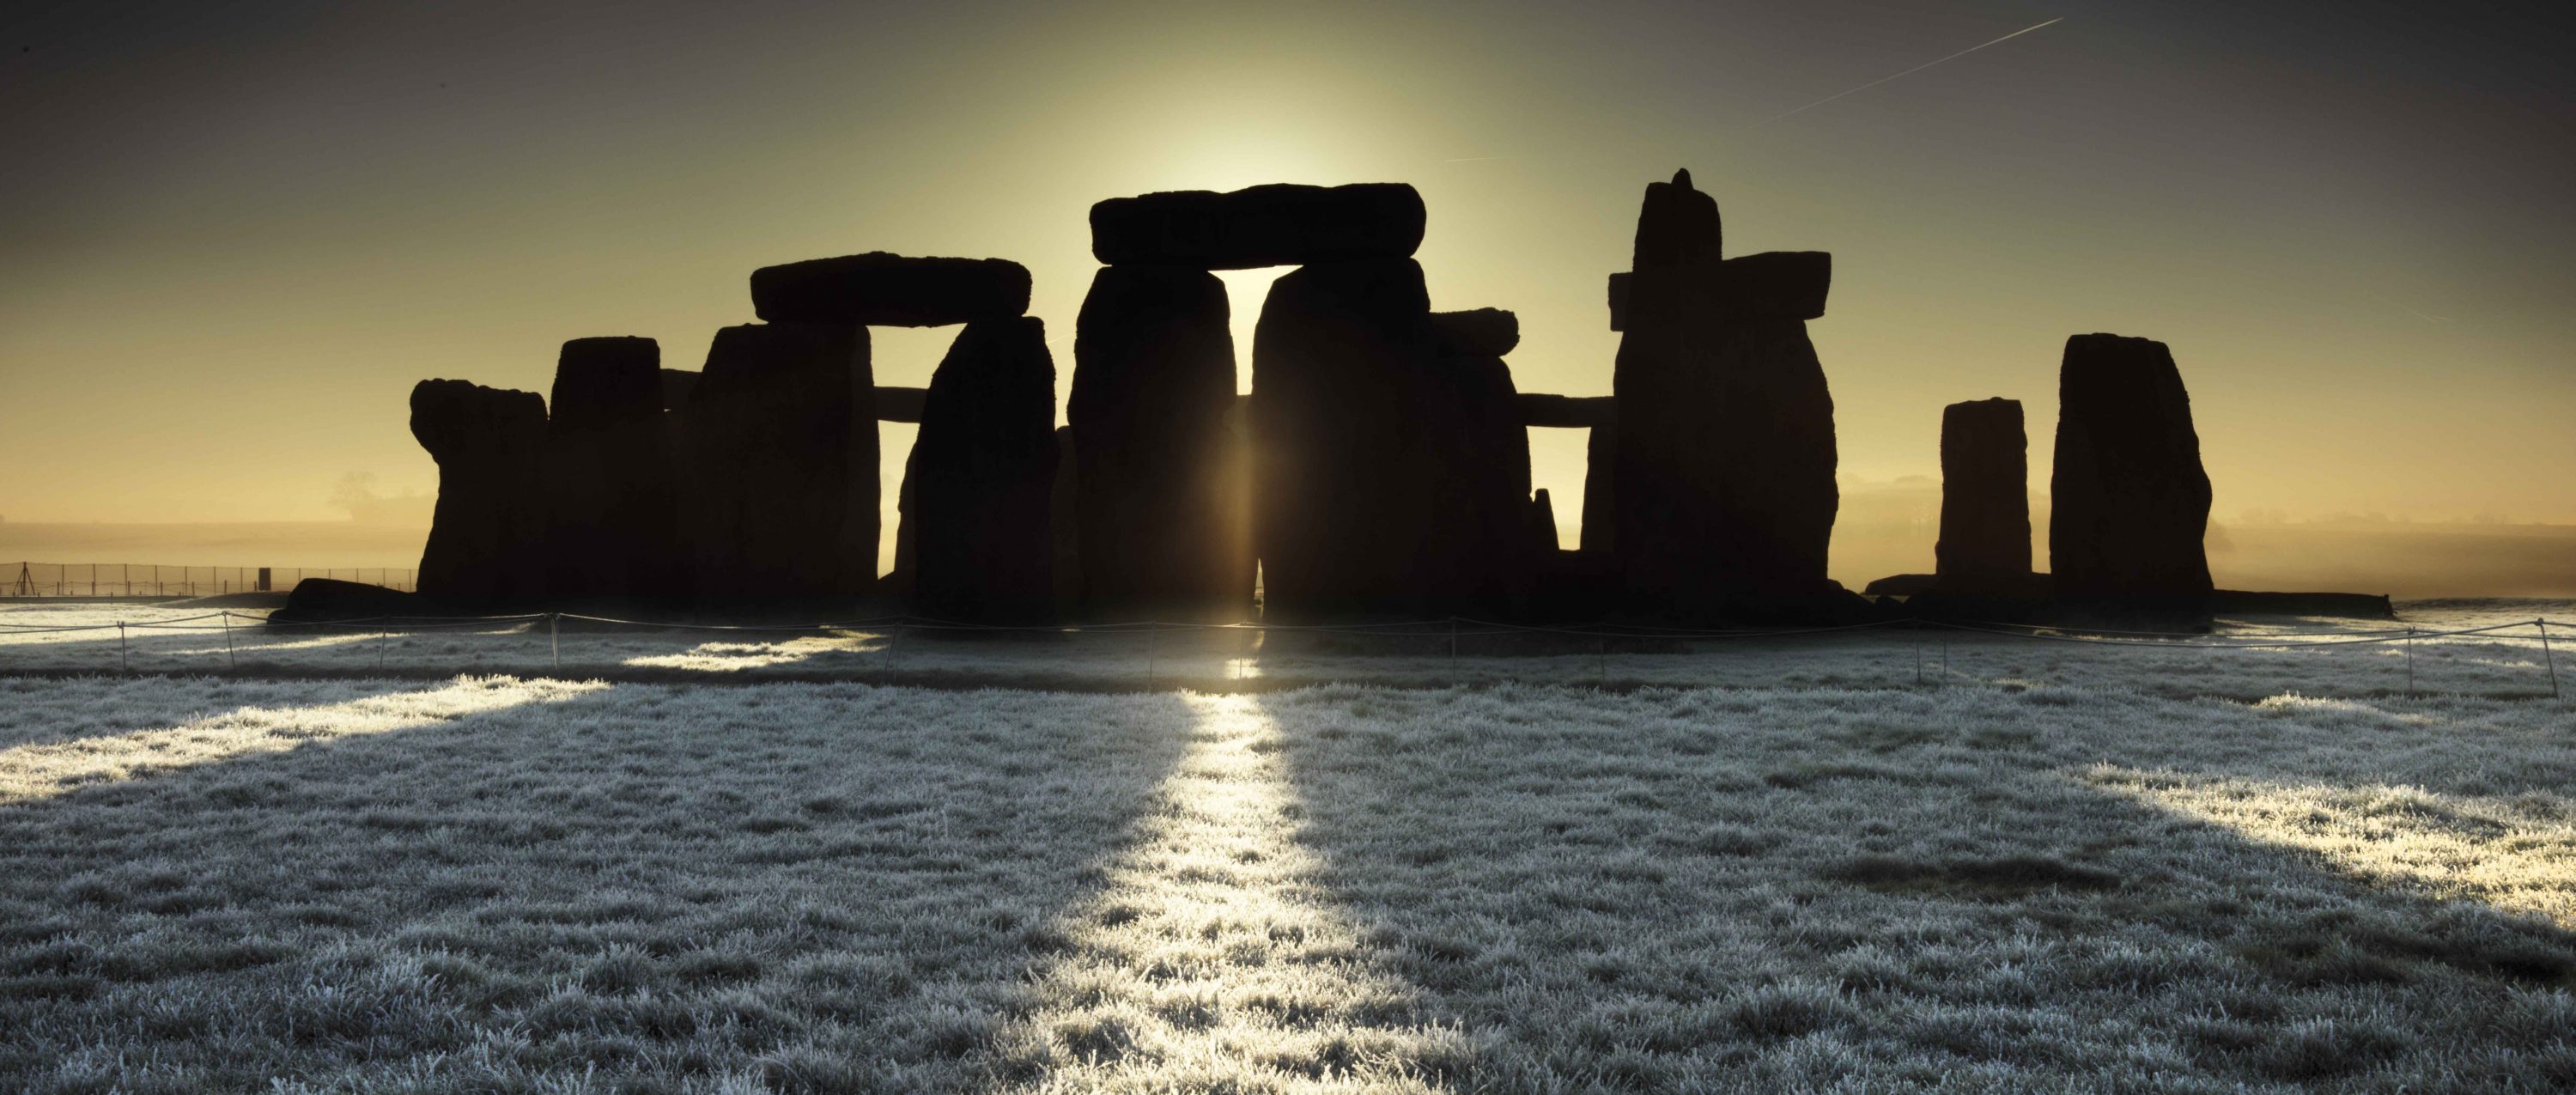 Forum | Happy Winter Solstice to you all. by BanksterDebtSlave | TWTD.co.uk